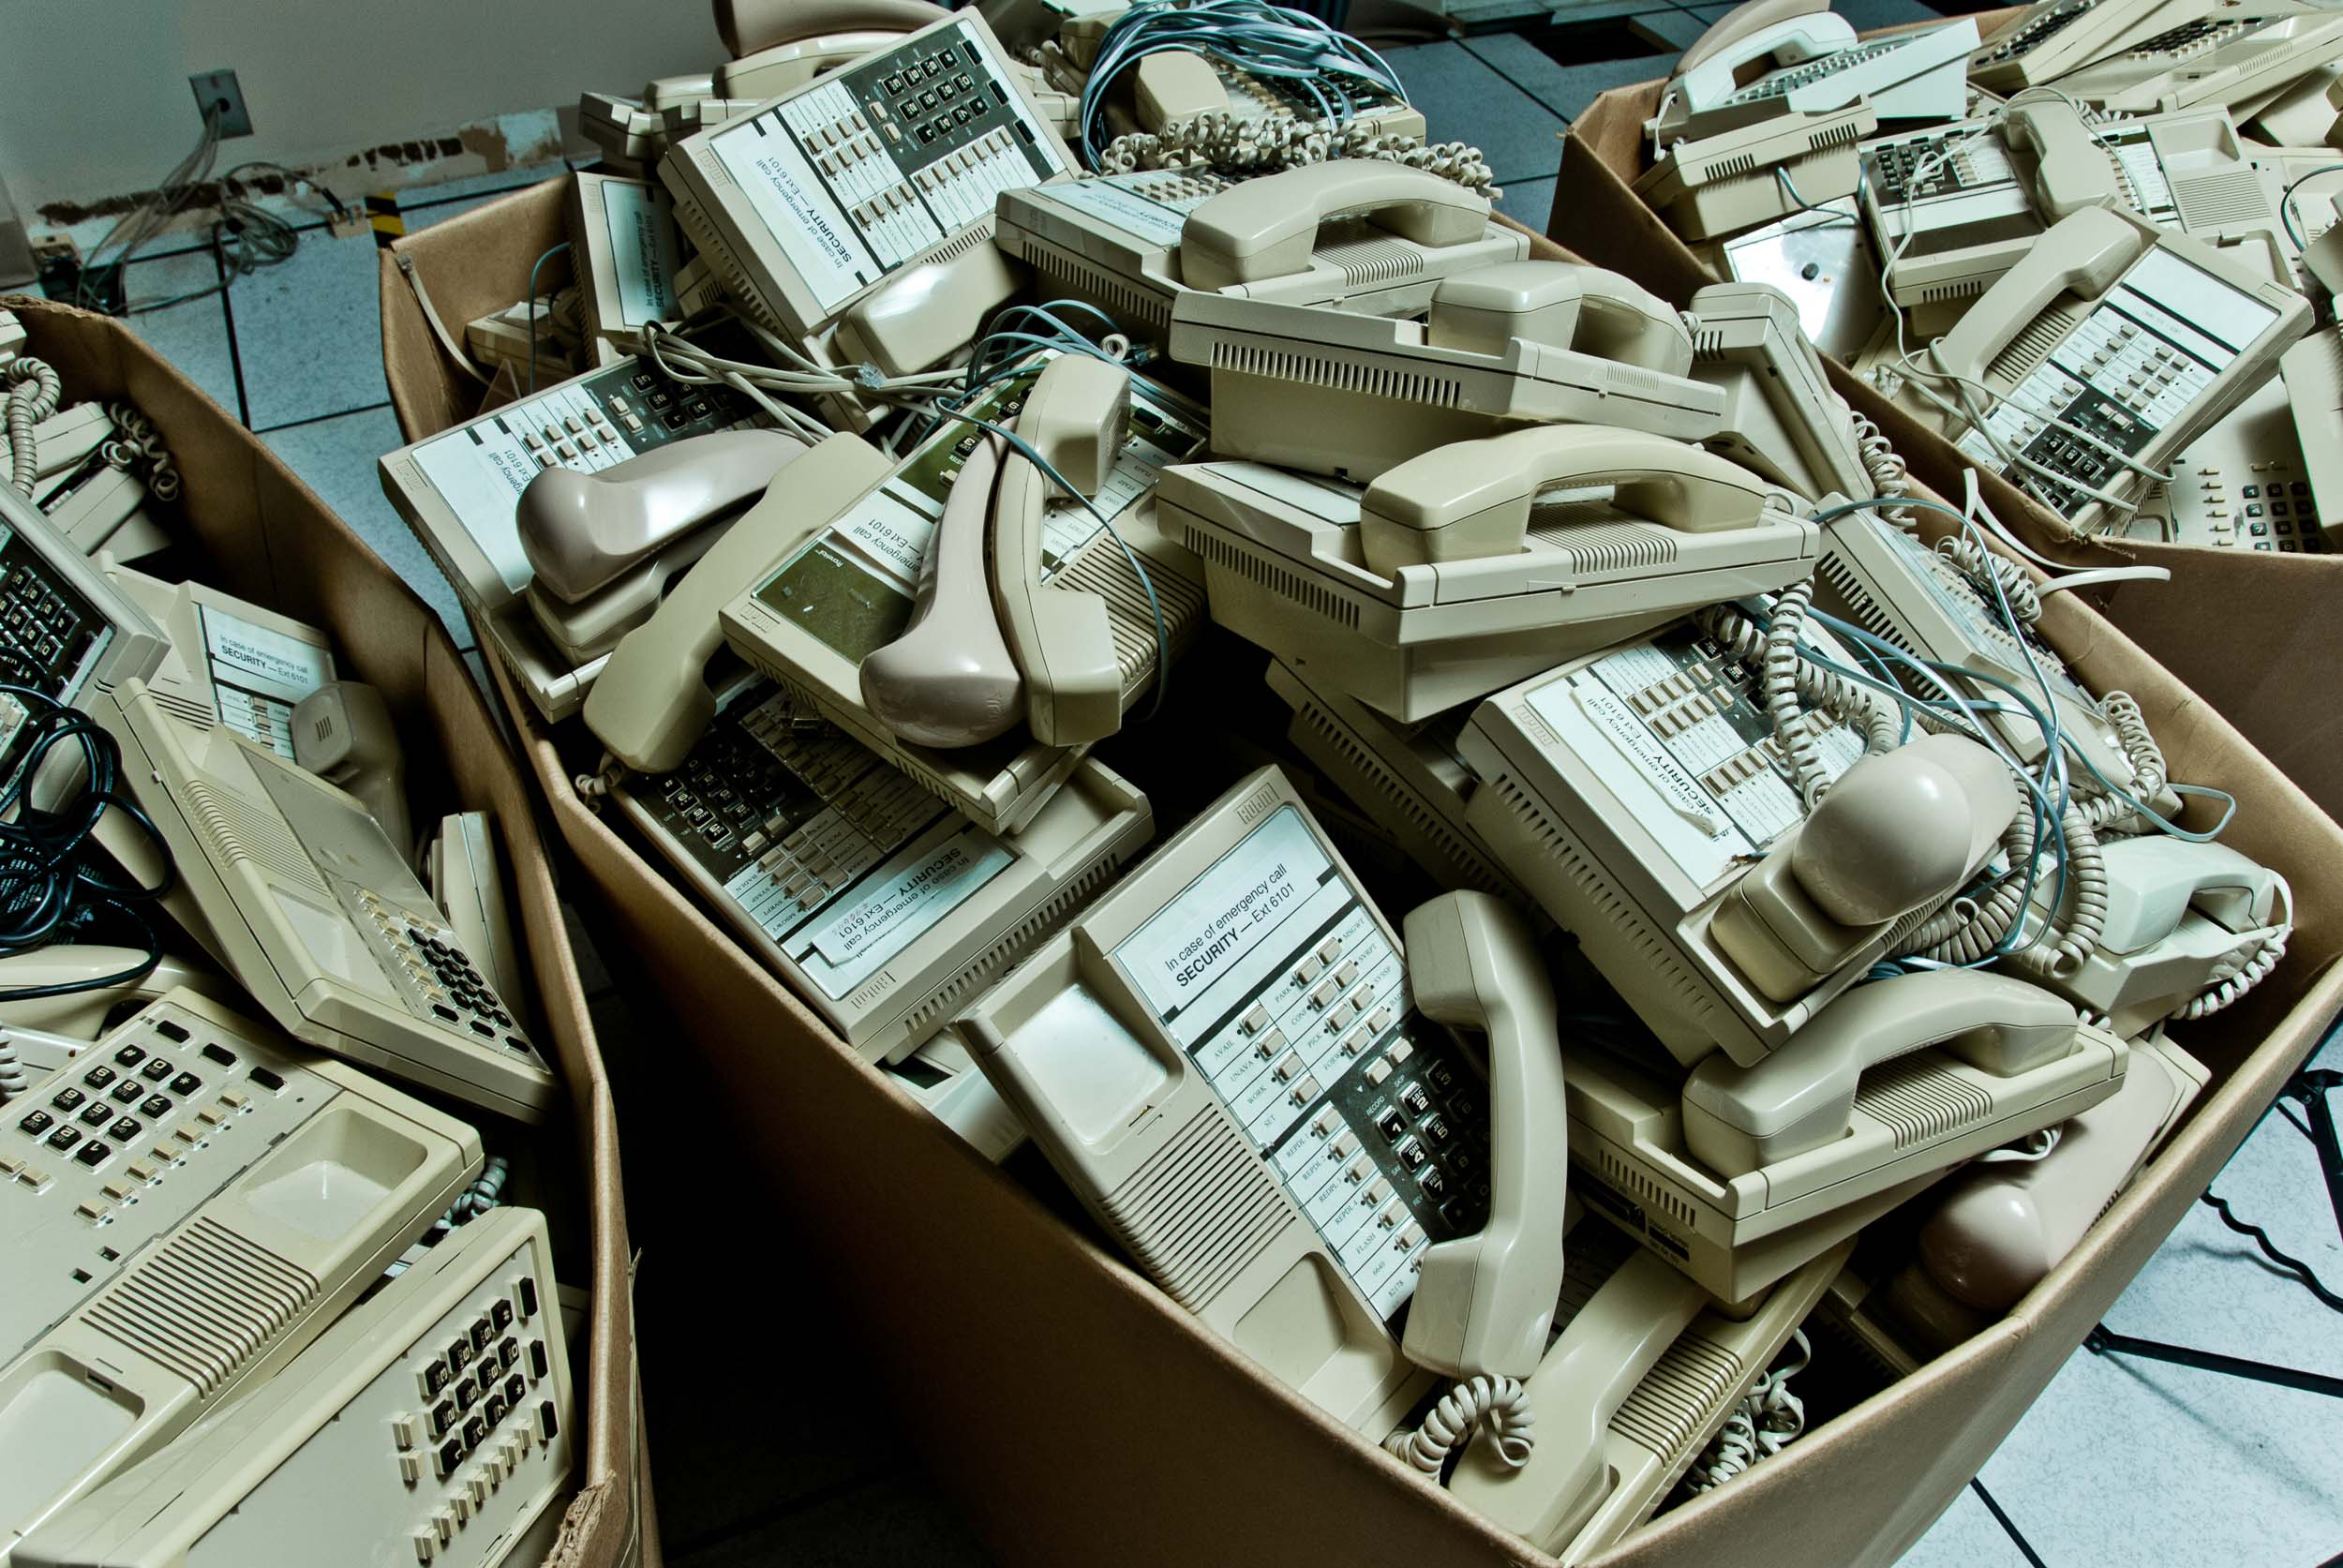 Boxes of Discarded Phones